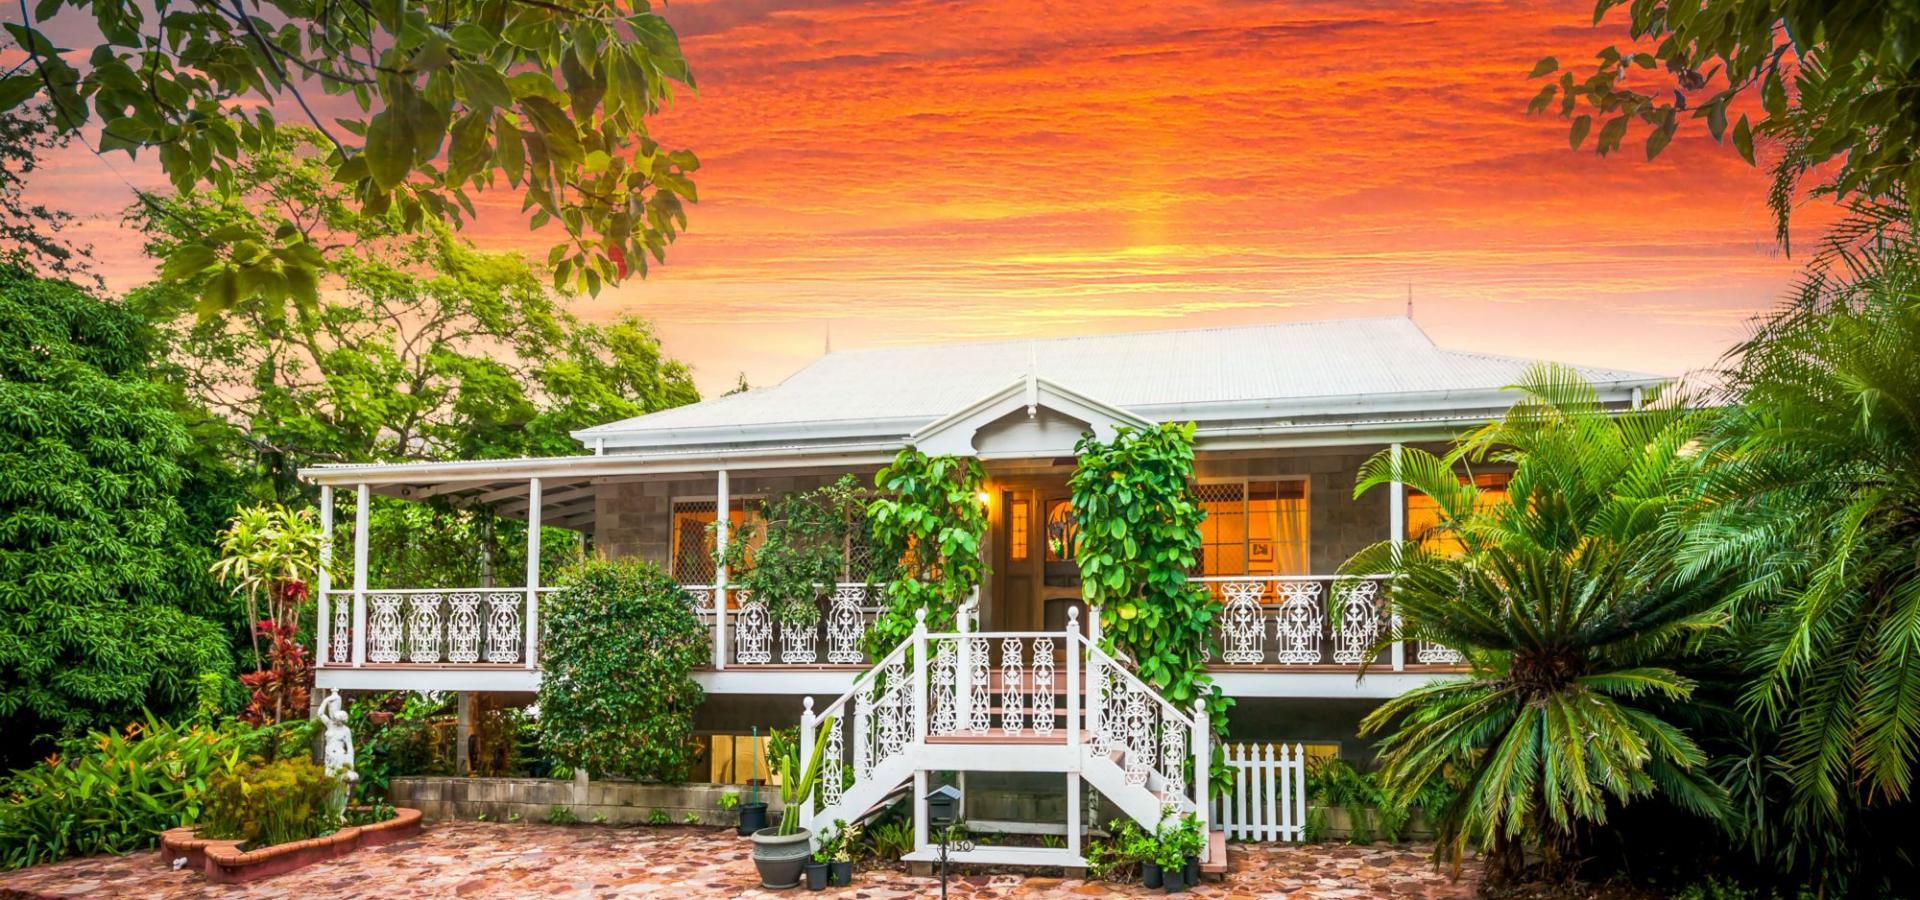 ACREAGE IN TOWN WITH A CLASSIC QUEENSLANDER